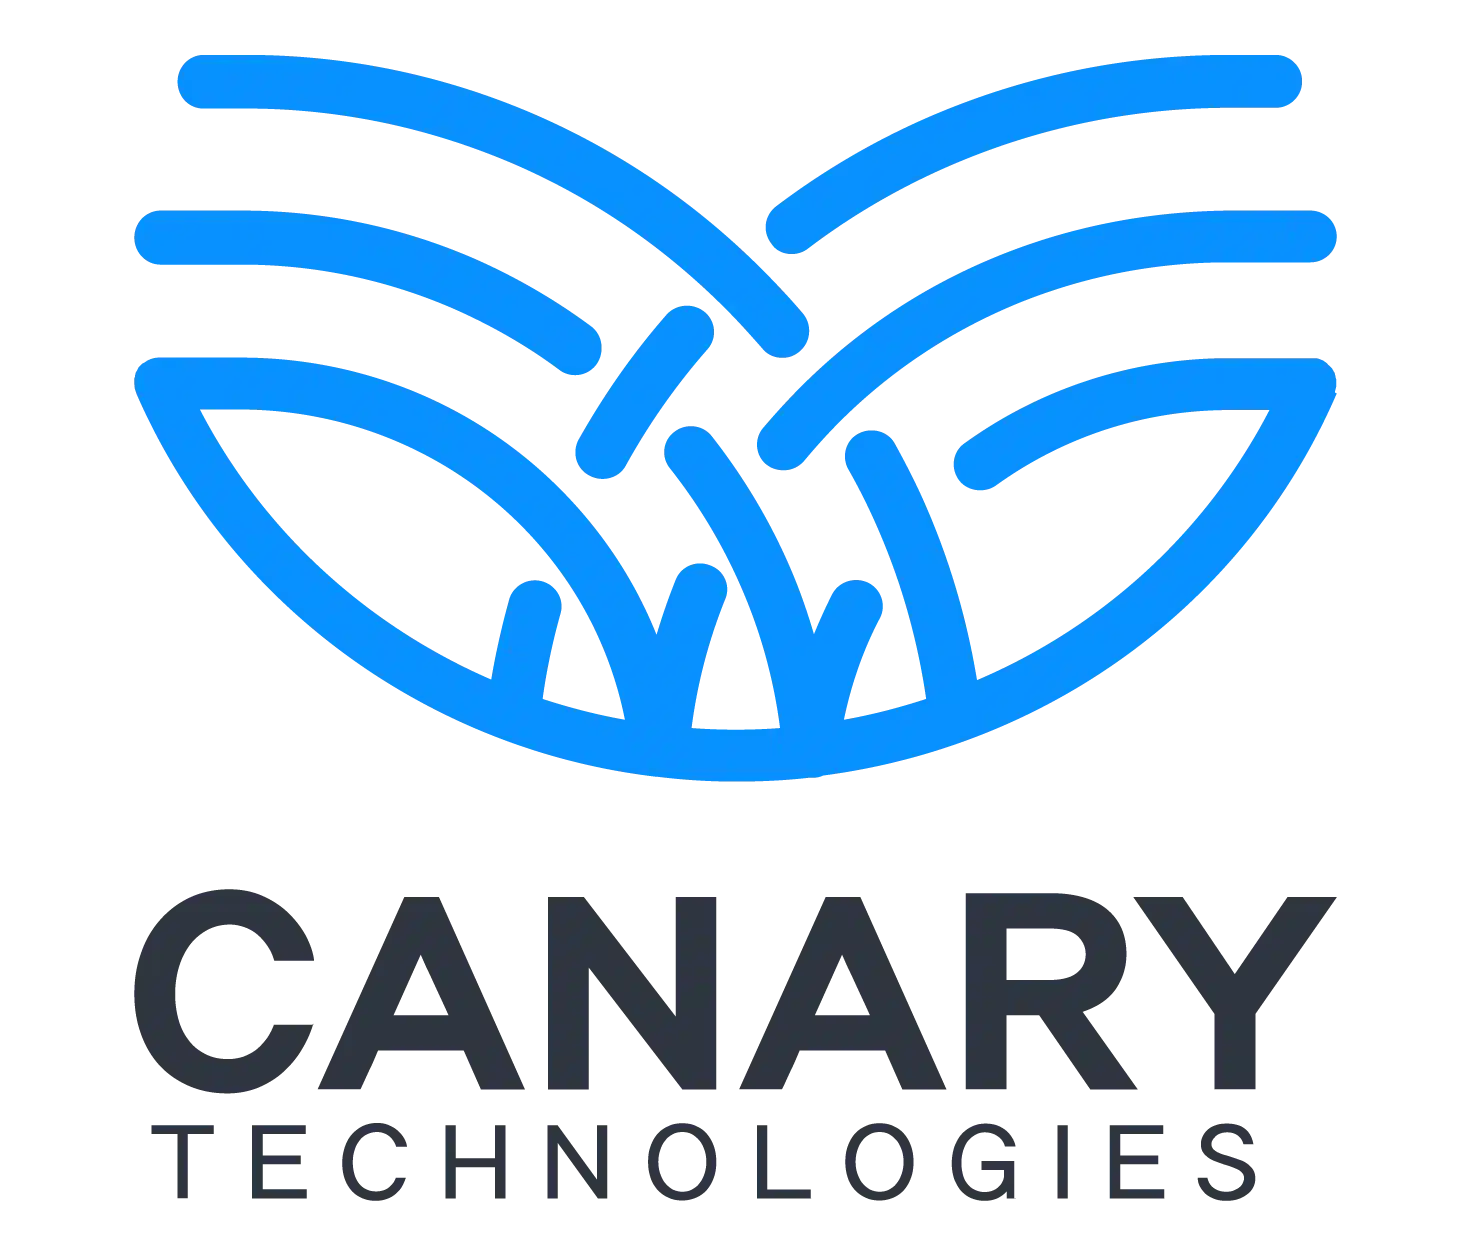 Canary InnQuest integration